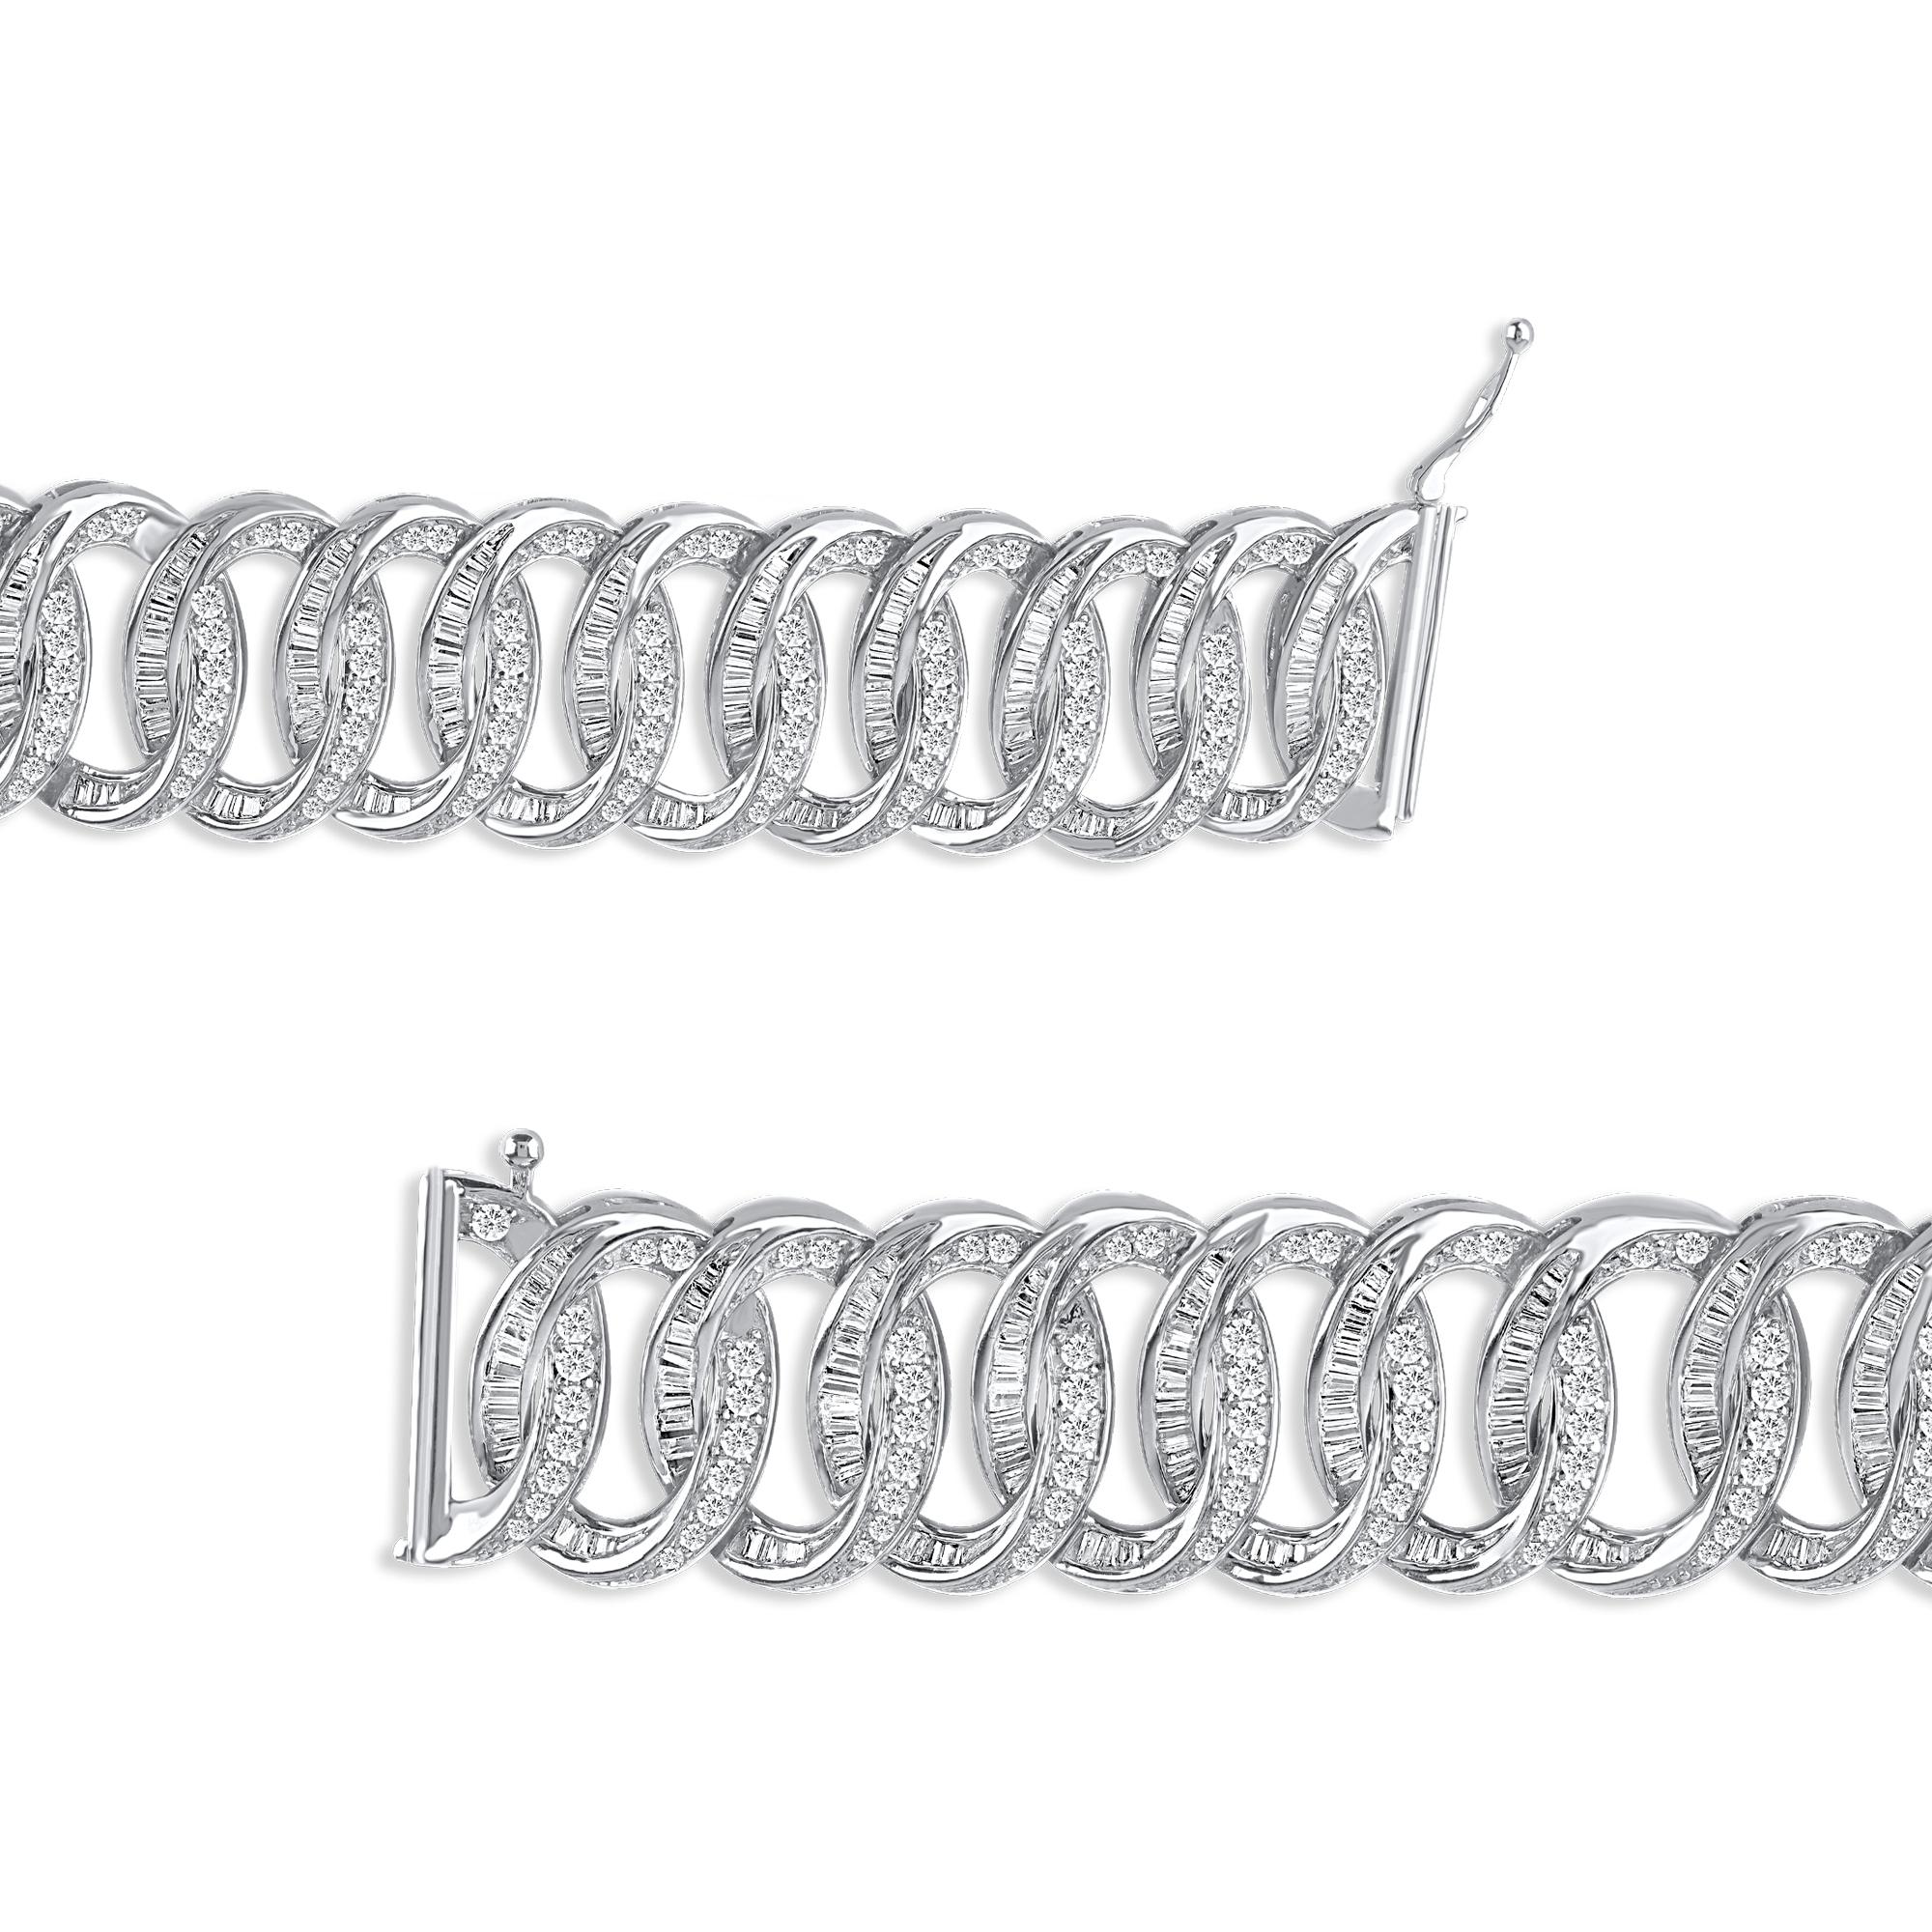 Express your sophisticated style with this gorgeous interlocking diamond bracelet. Expertly handcrafted by our inhouse experts in 14 karat white gold and studded with 480 brilliant cut and baguette diamond set in prong and channel setting. The total